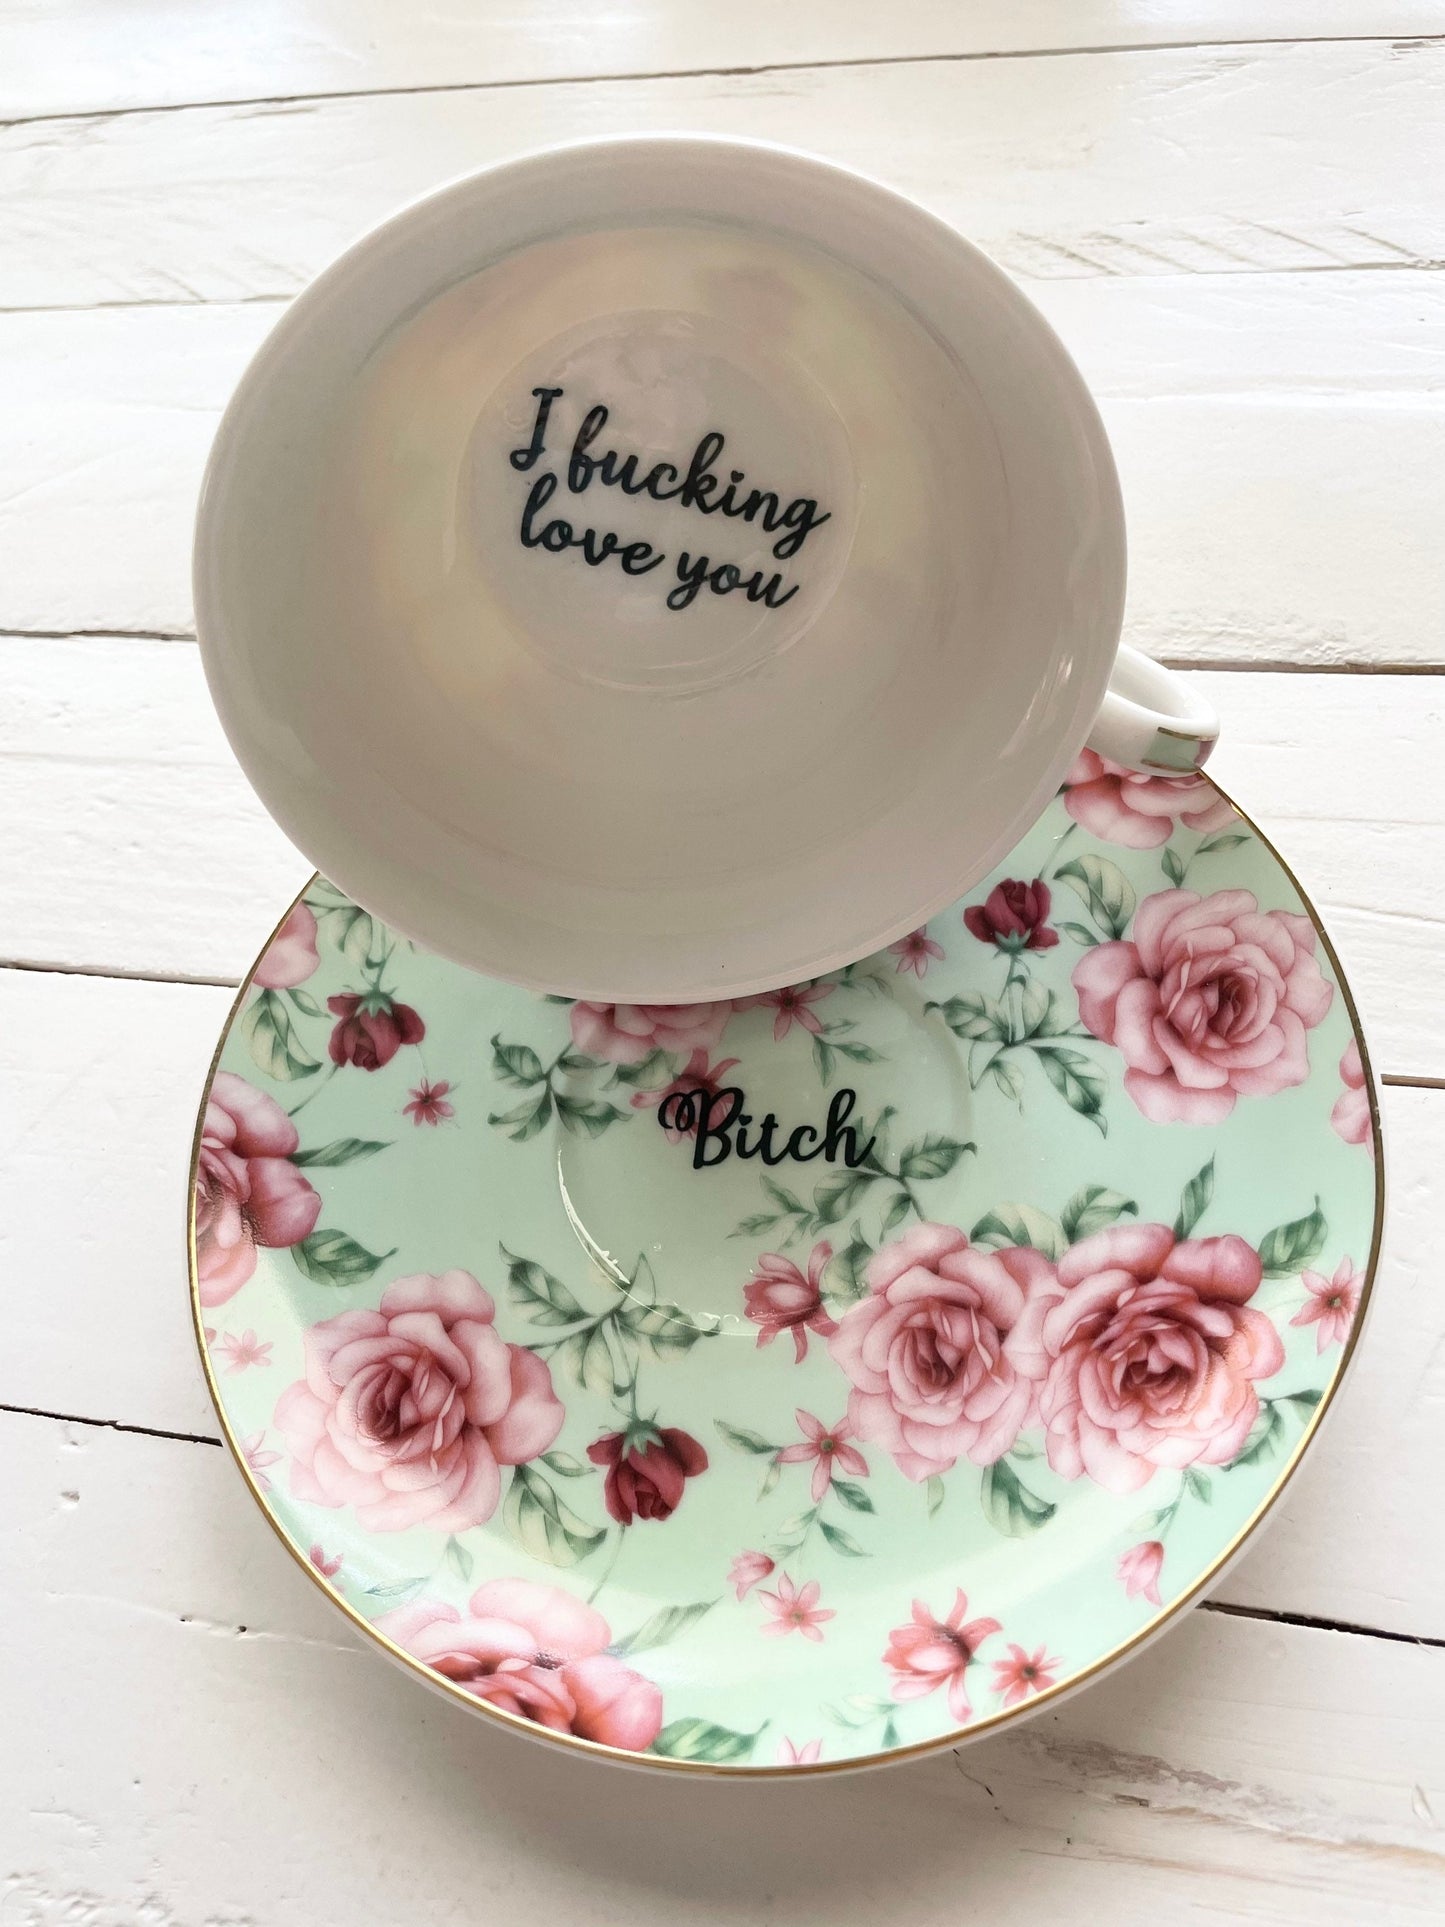 I fucking love you- bitch, Tea cup and saucer, Sea foam green and Pink Floral